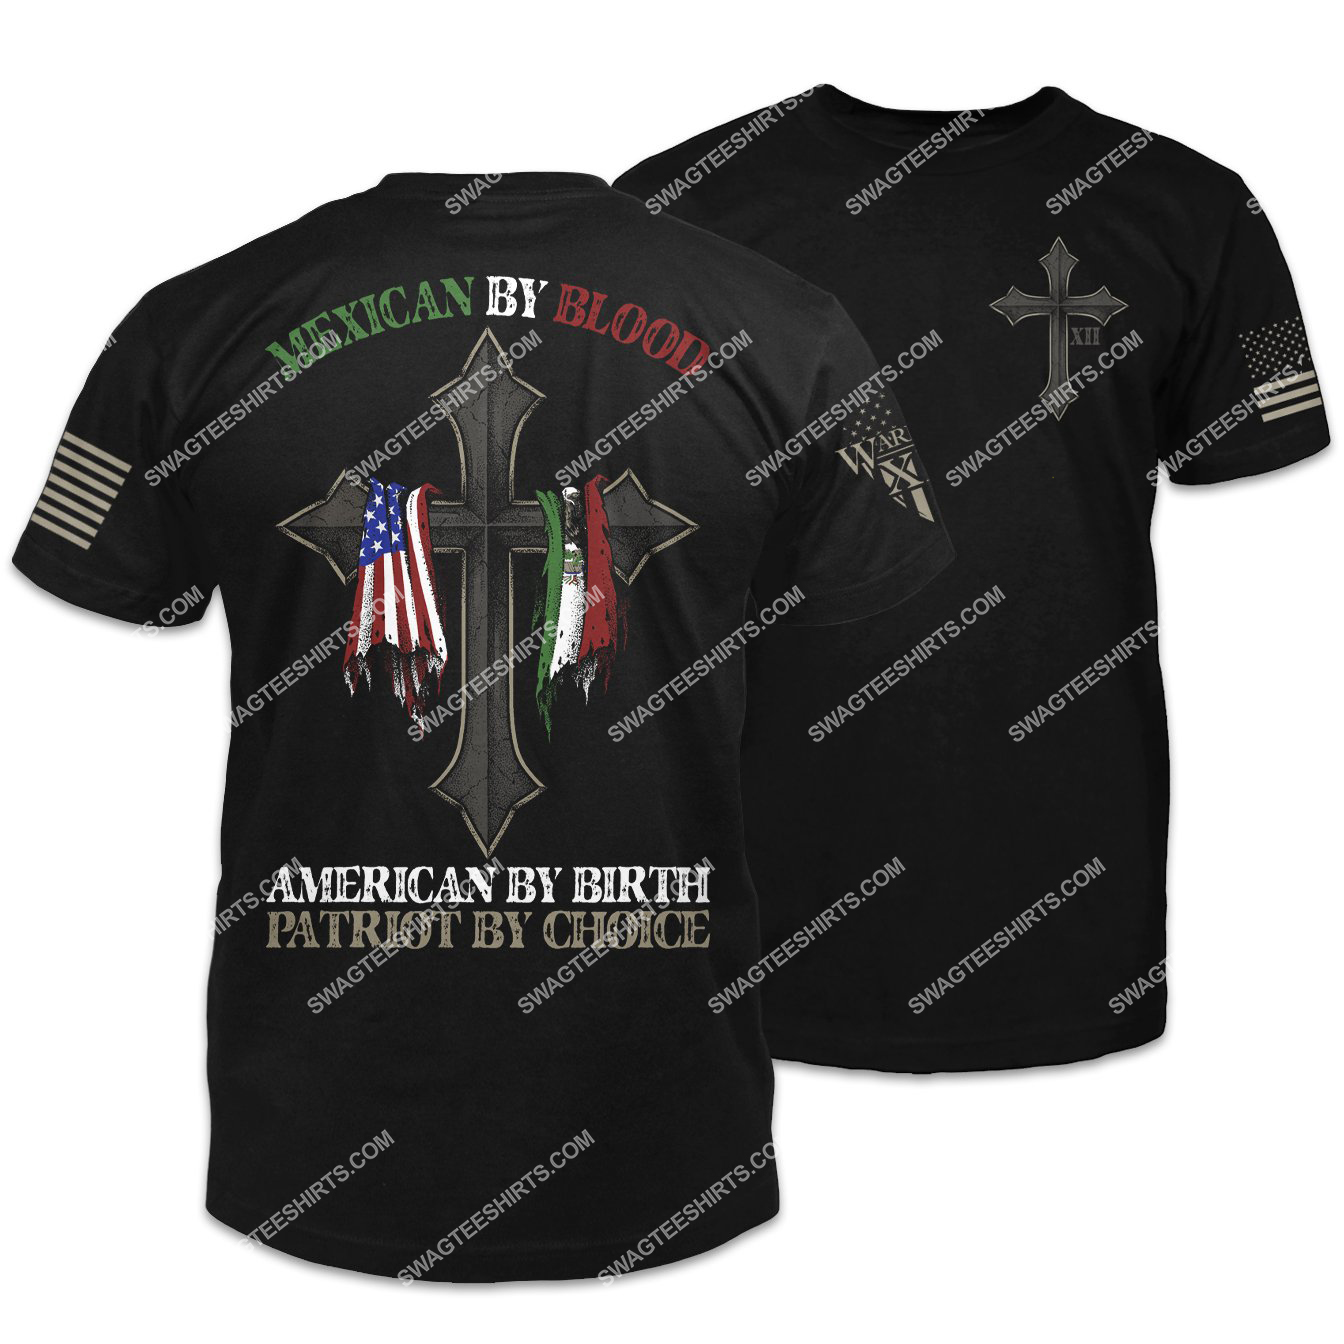 mexican by blood american by birth patriot by choice shirt 1 - Copy (2)